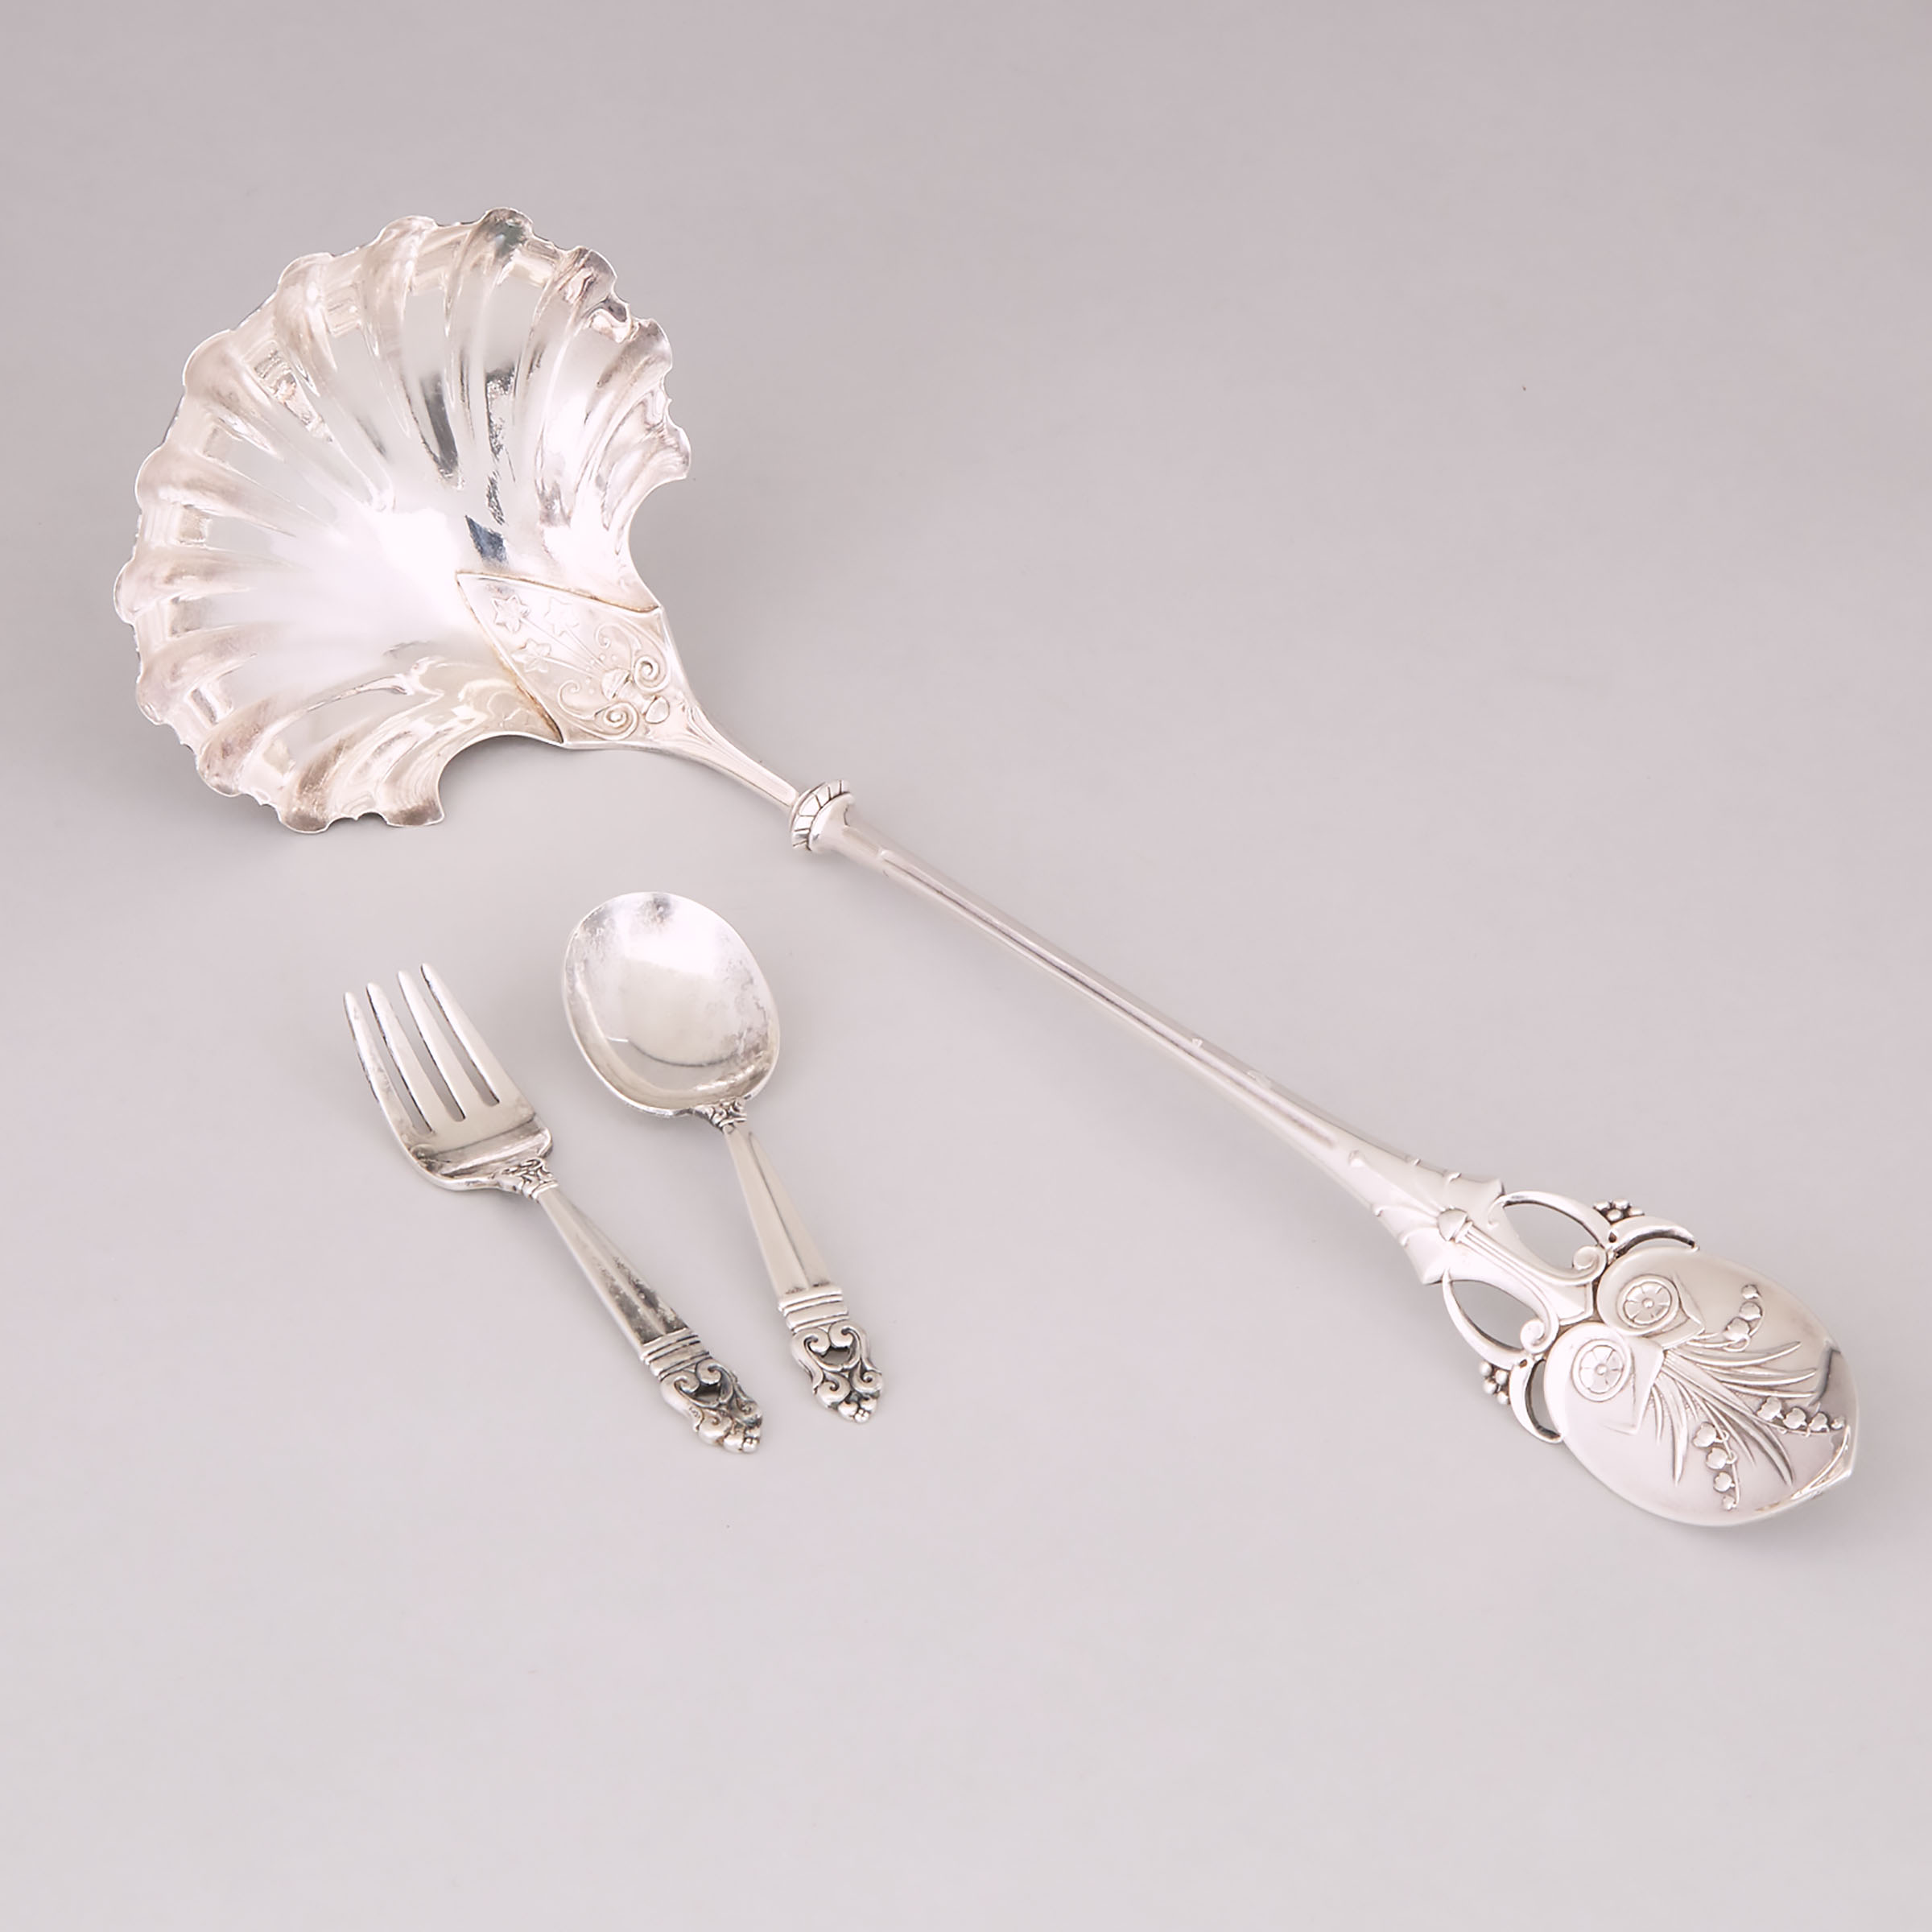 American Silver 'Lily' Pattern Punch Ladle, Gorham Mfg. Co., Providence, R.I., 1870s and a 'Royal Danish' Child's Spoon and Fork, International Silver Co., Meriden, Ct., 20th century